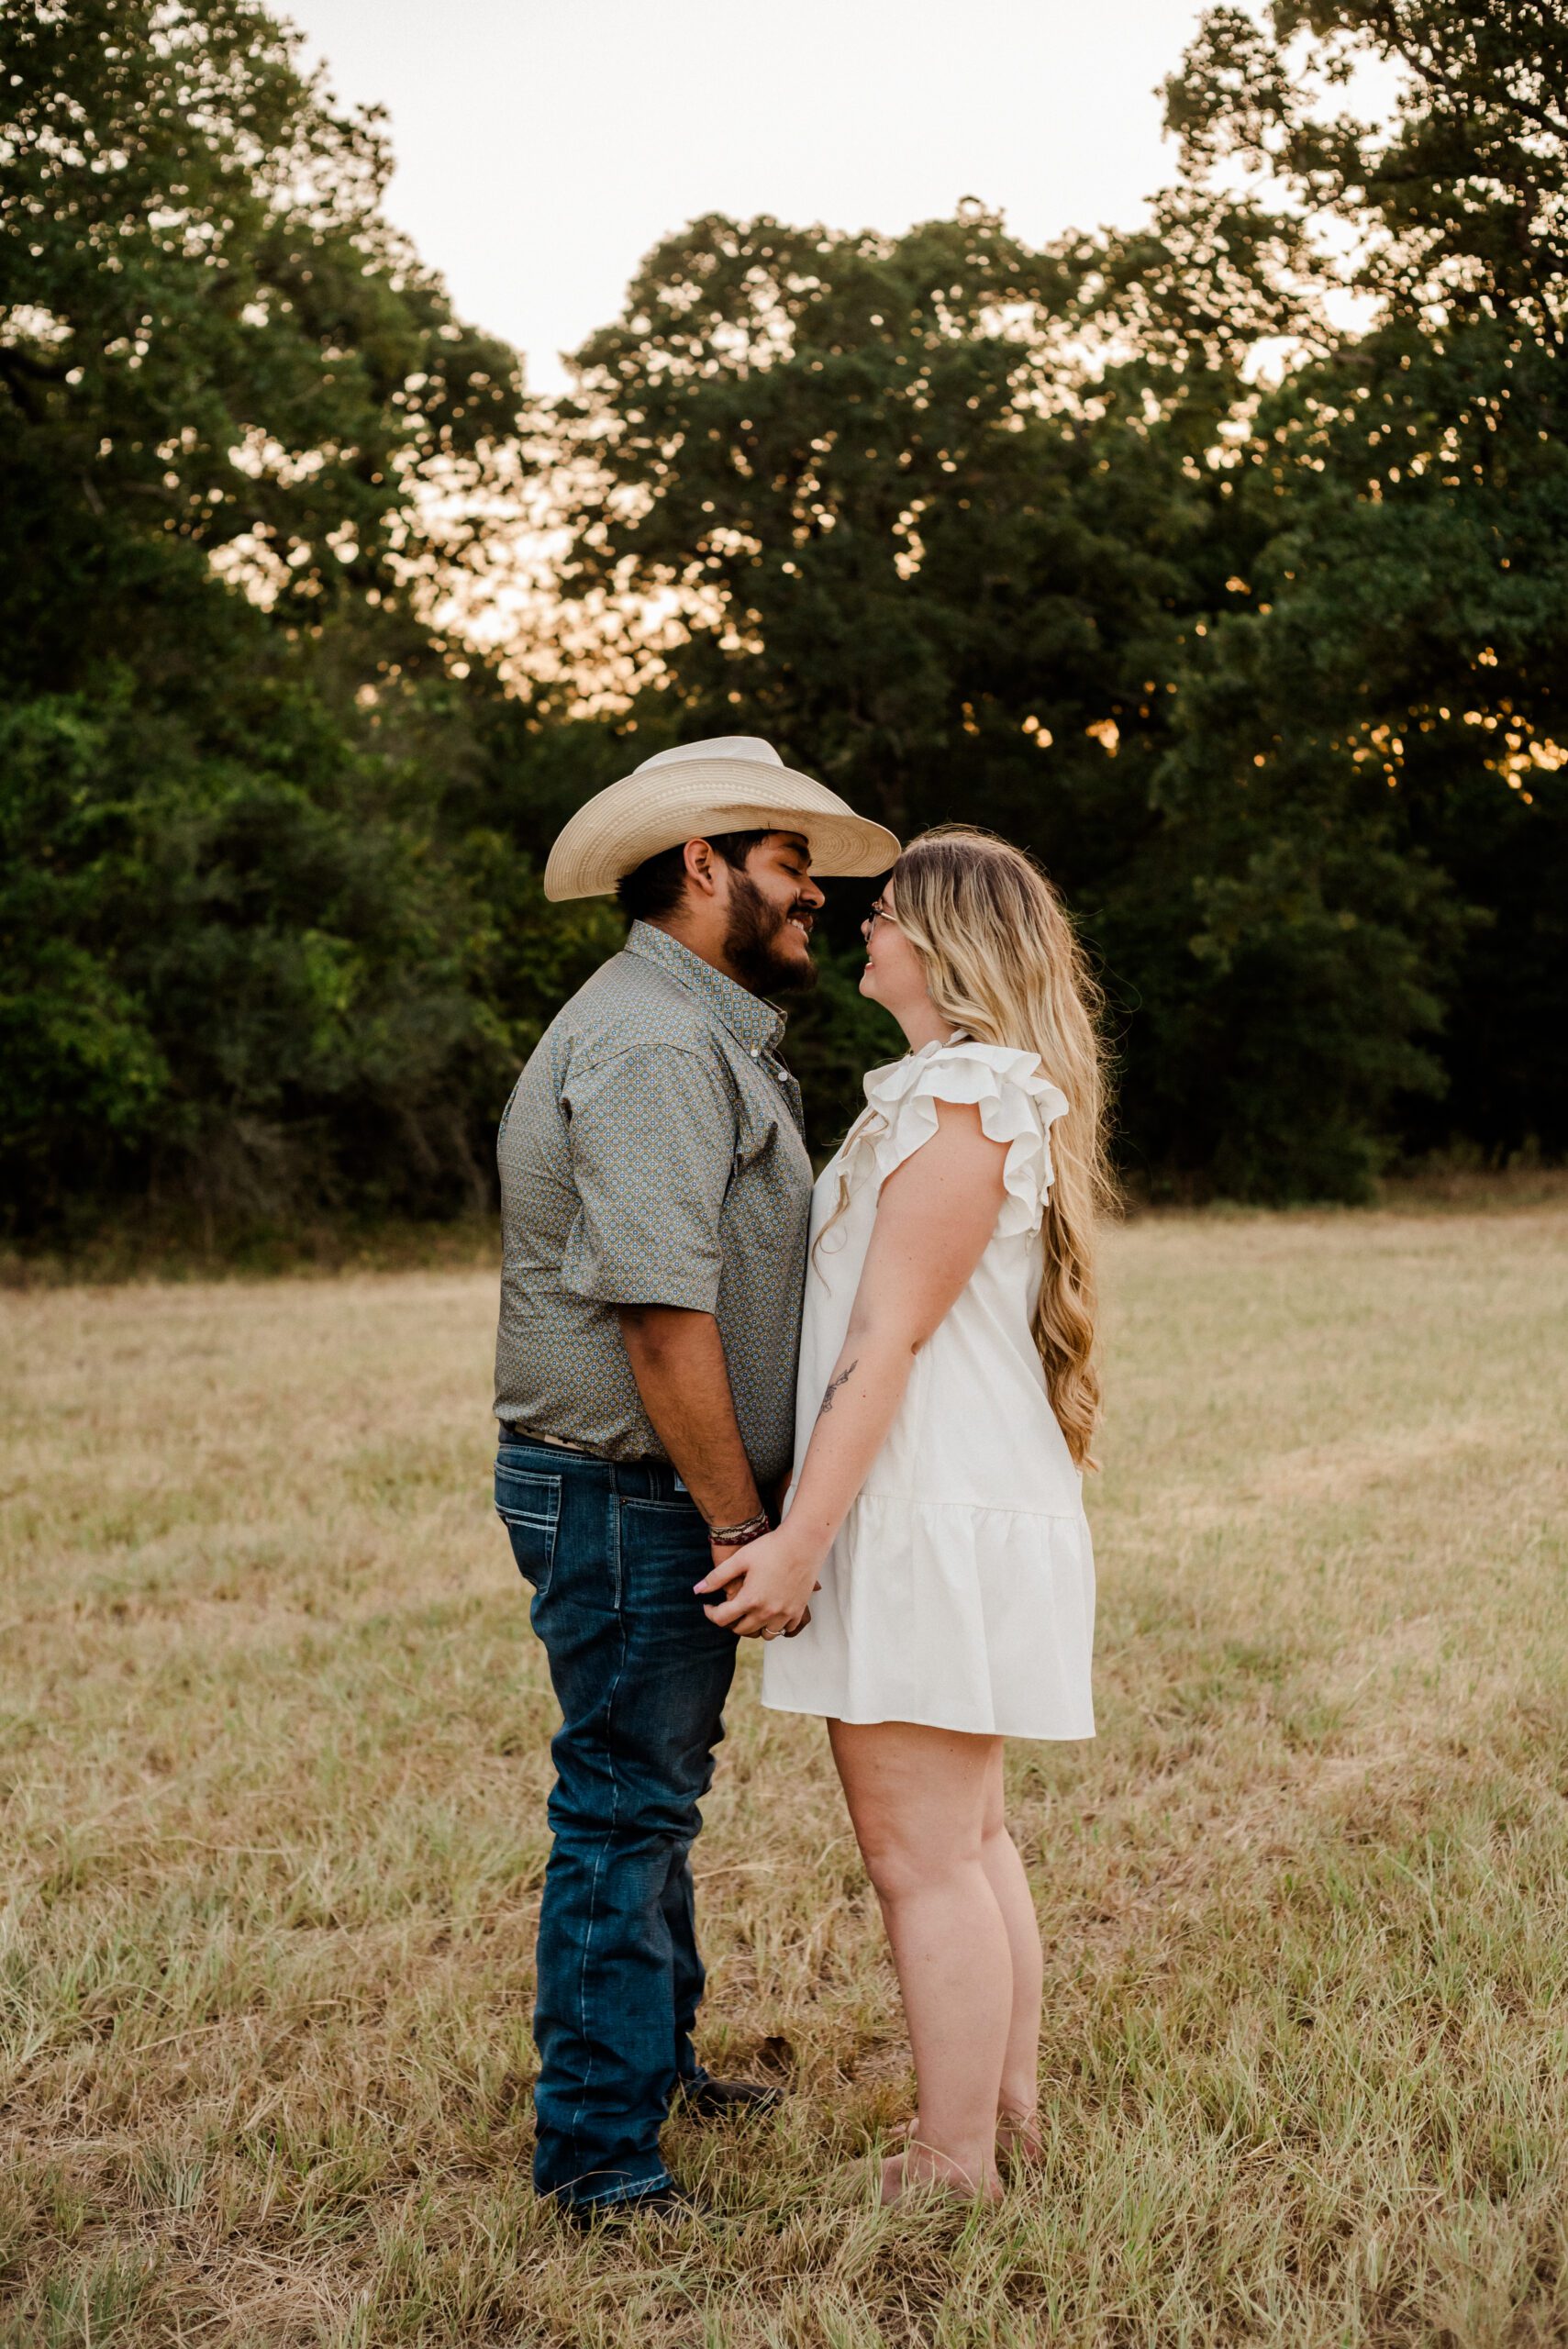 Hailey and Jesus' Engagement Session at Peach Creek Ranch in College Station, TX with Rachel Driskell Photography